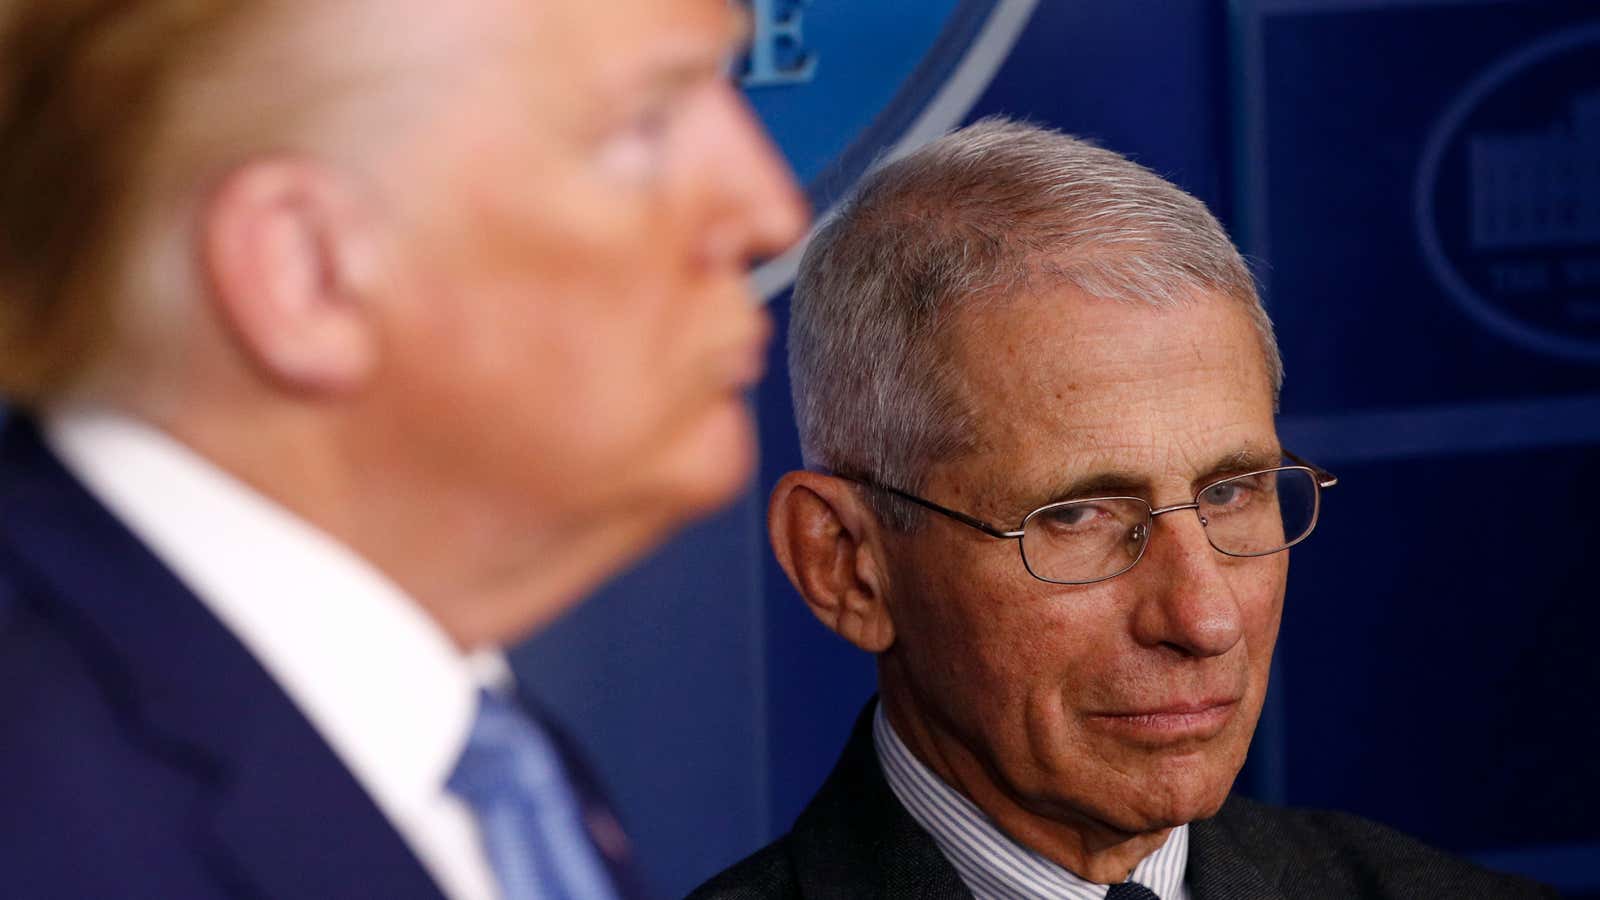 Trump and Anthony Fauci, director of the National Institute of Allergy and Infectious Diseases.